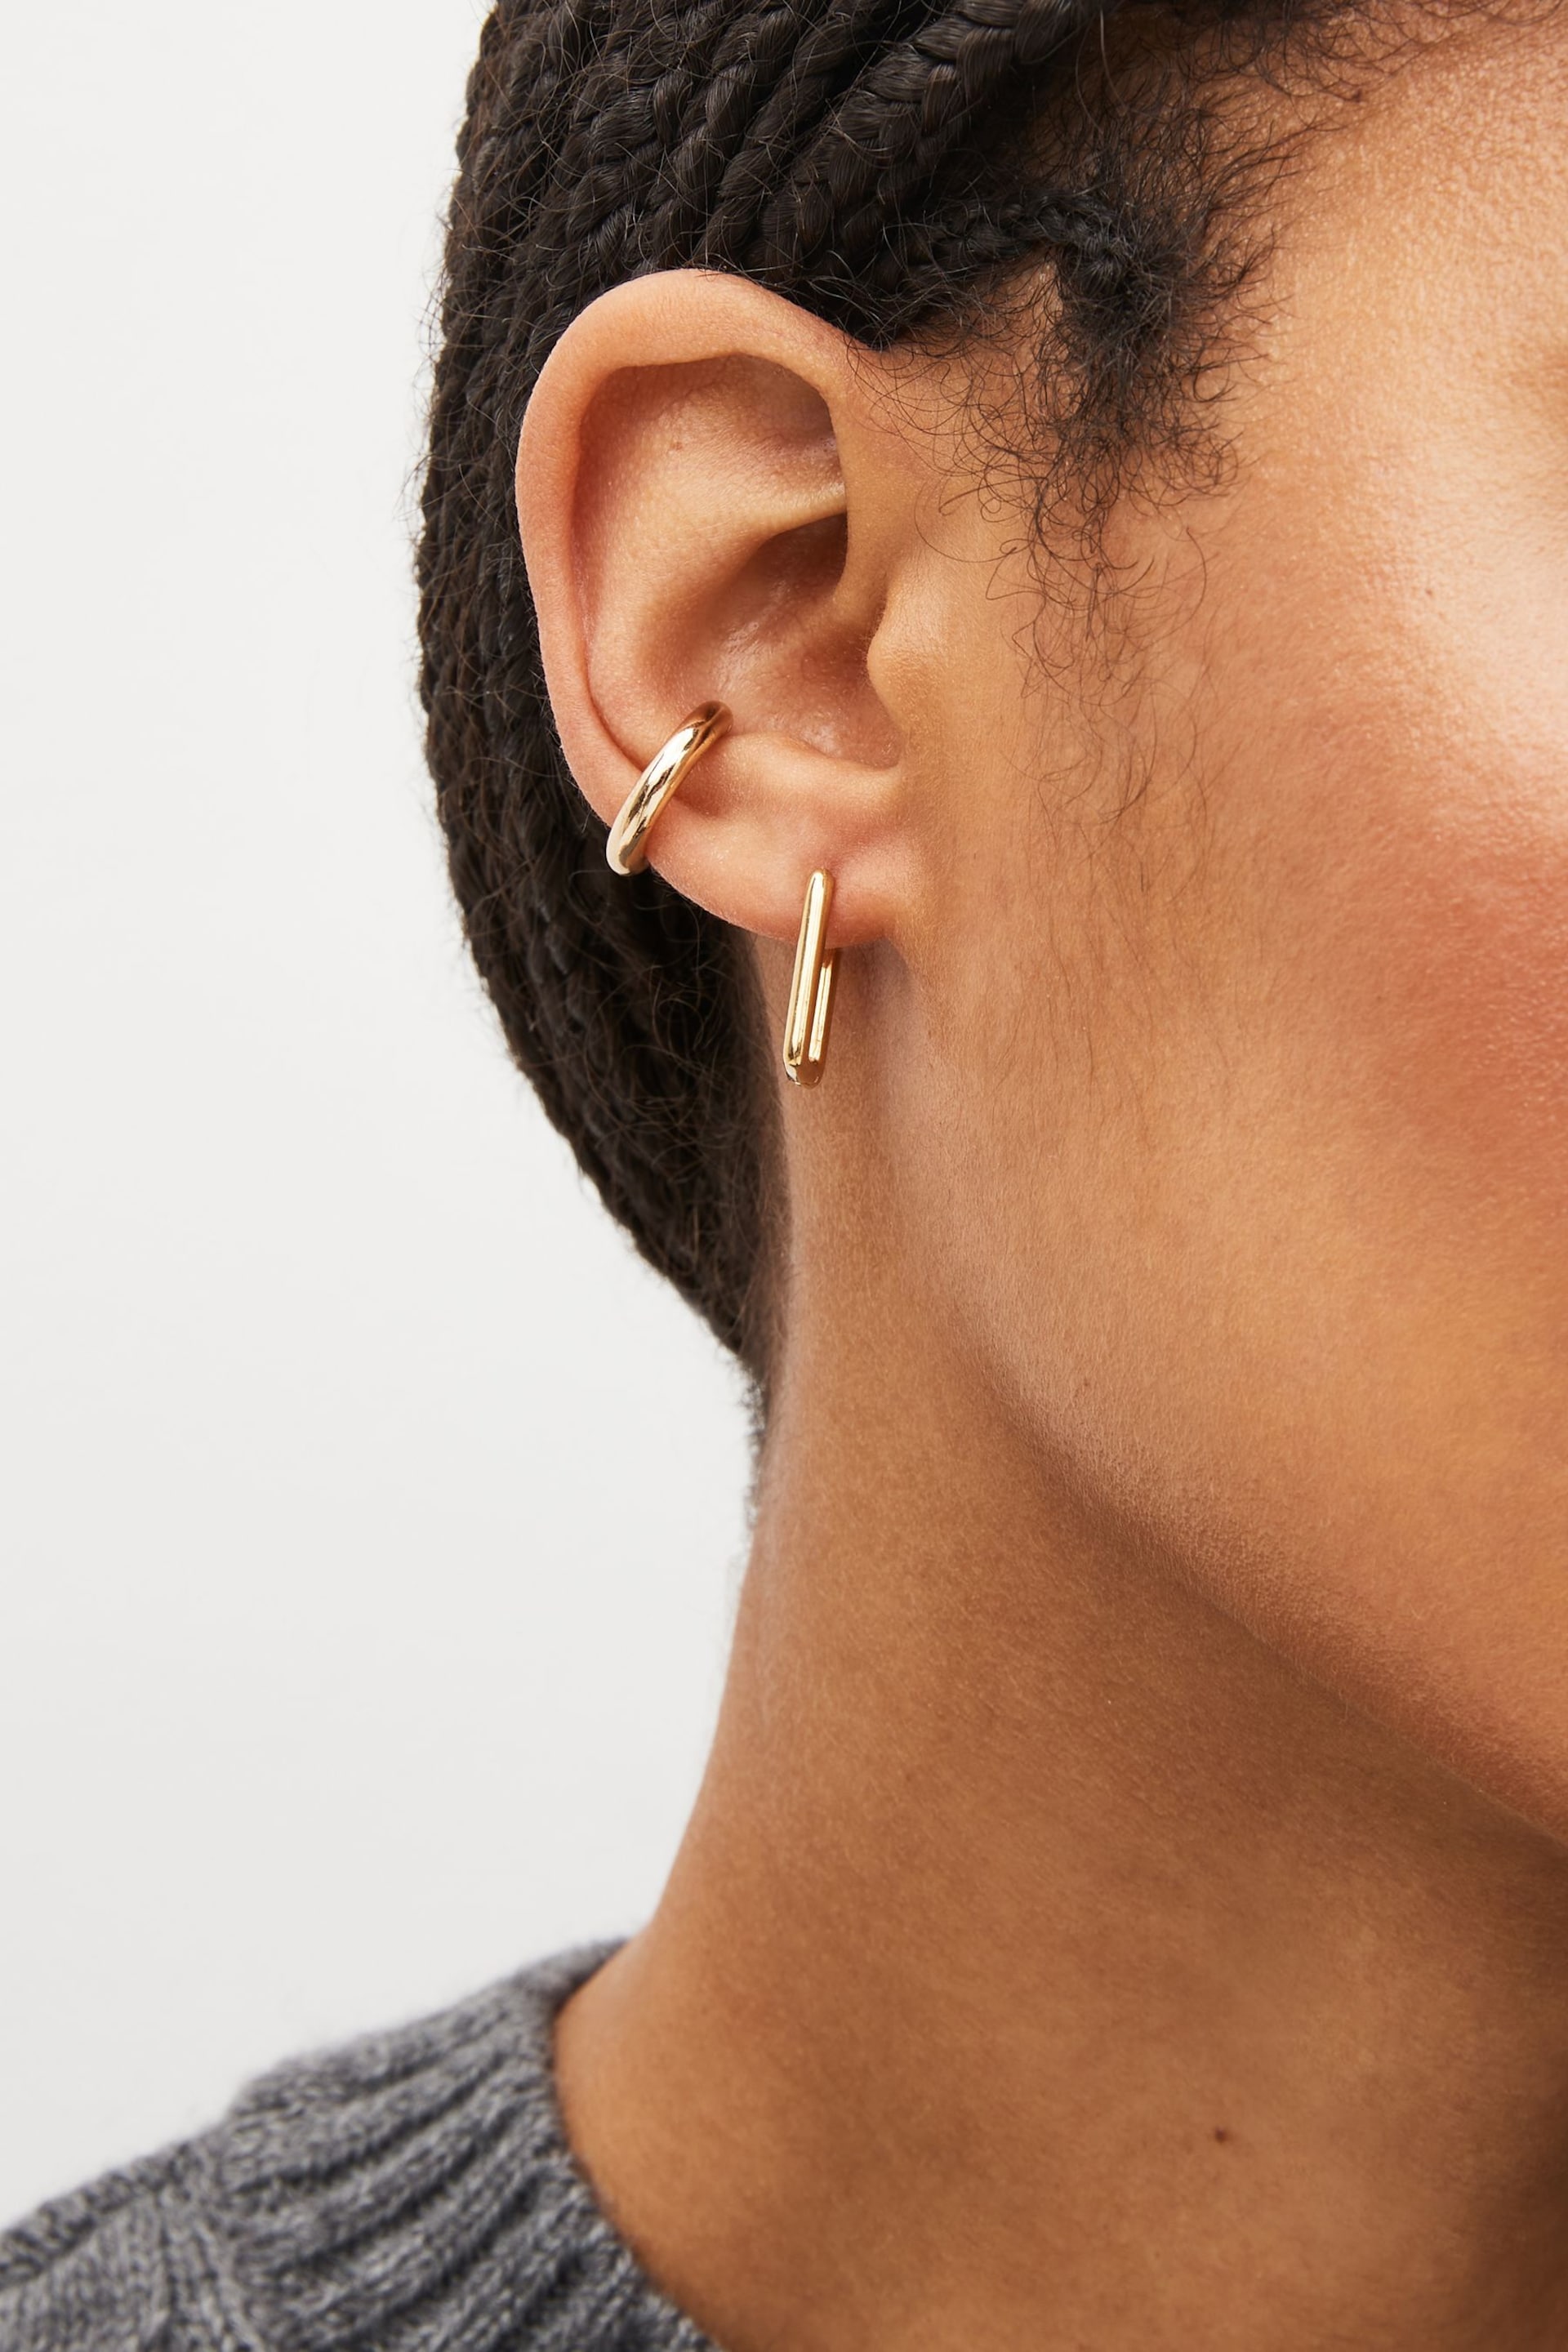 10 Carat Gold Plated N. Premium Chunky Ear Cuff Made With Recycled Brass - Image 2 of 4